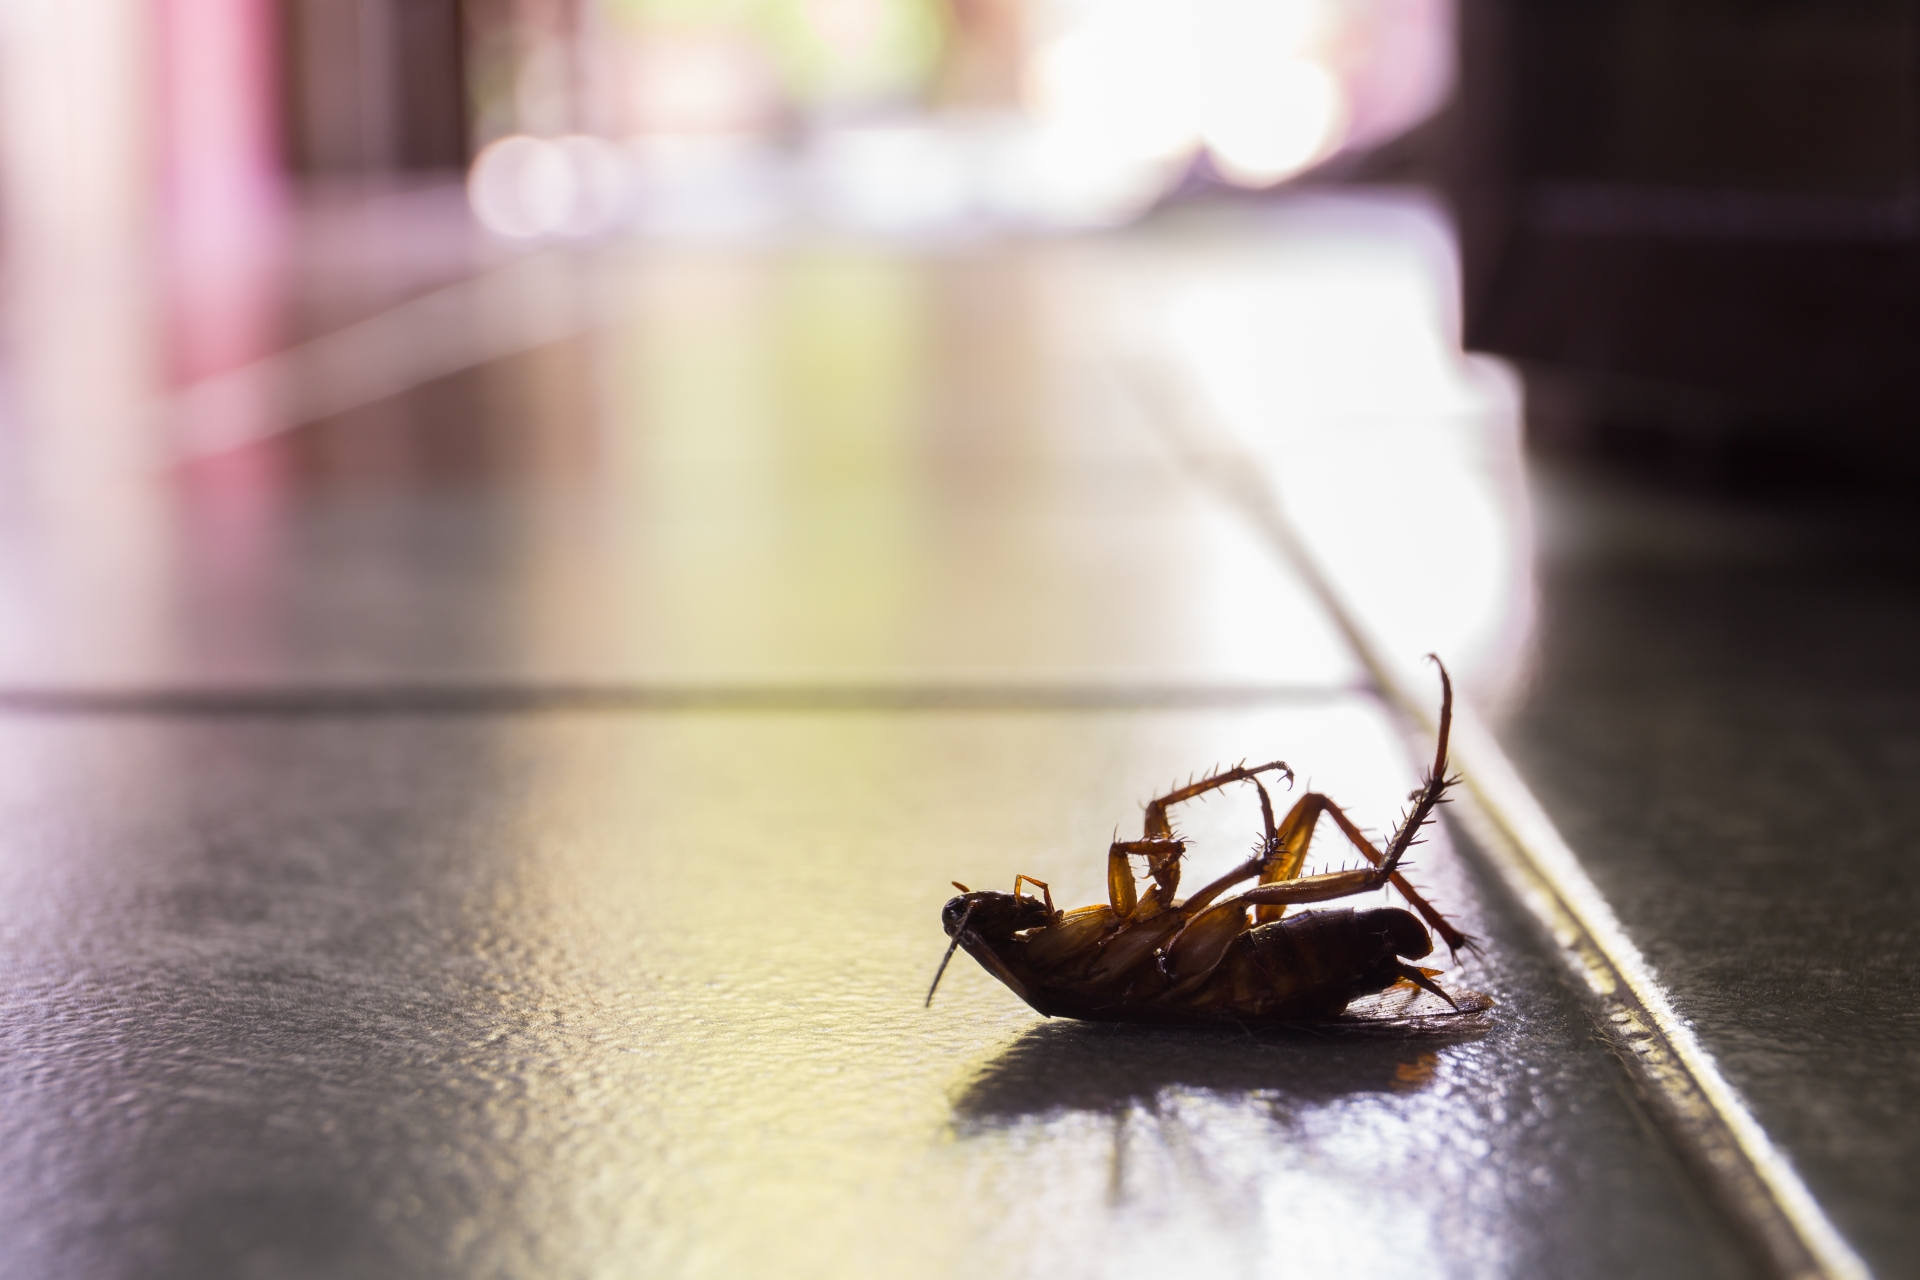 Cockroach Control, Pest Control in Woolwich, SE18. Call Now 020 8166 9746